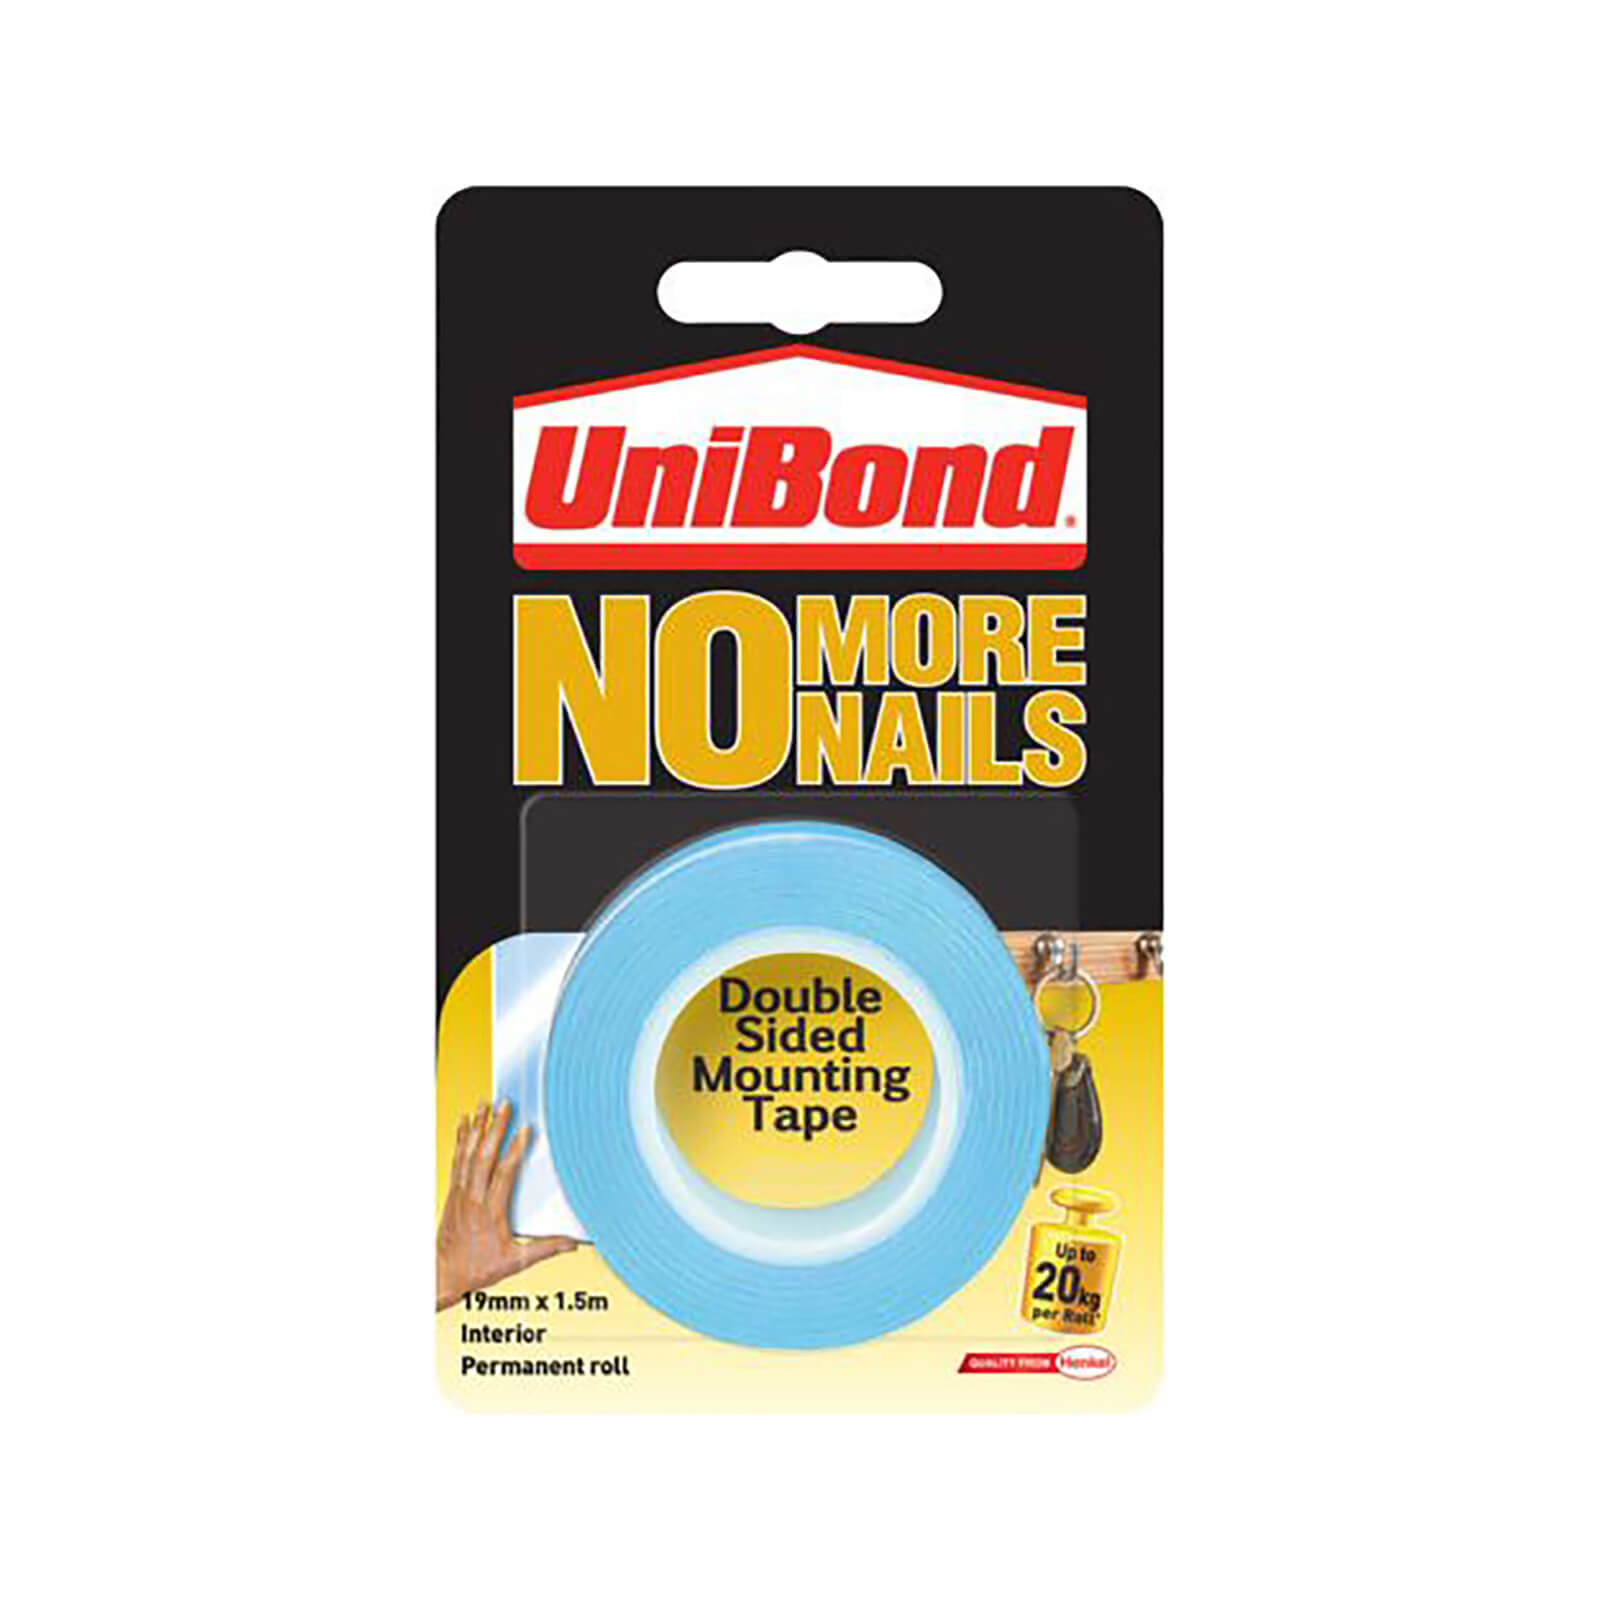 Photo of Unibond No More Nails Double Sided Mounting Tape Translucent - 19mm X 1.5m